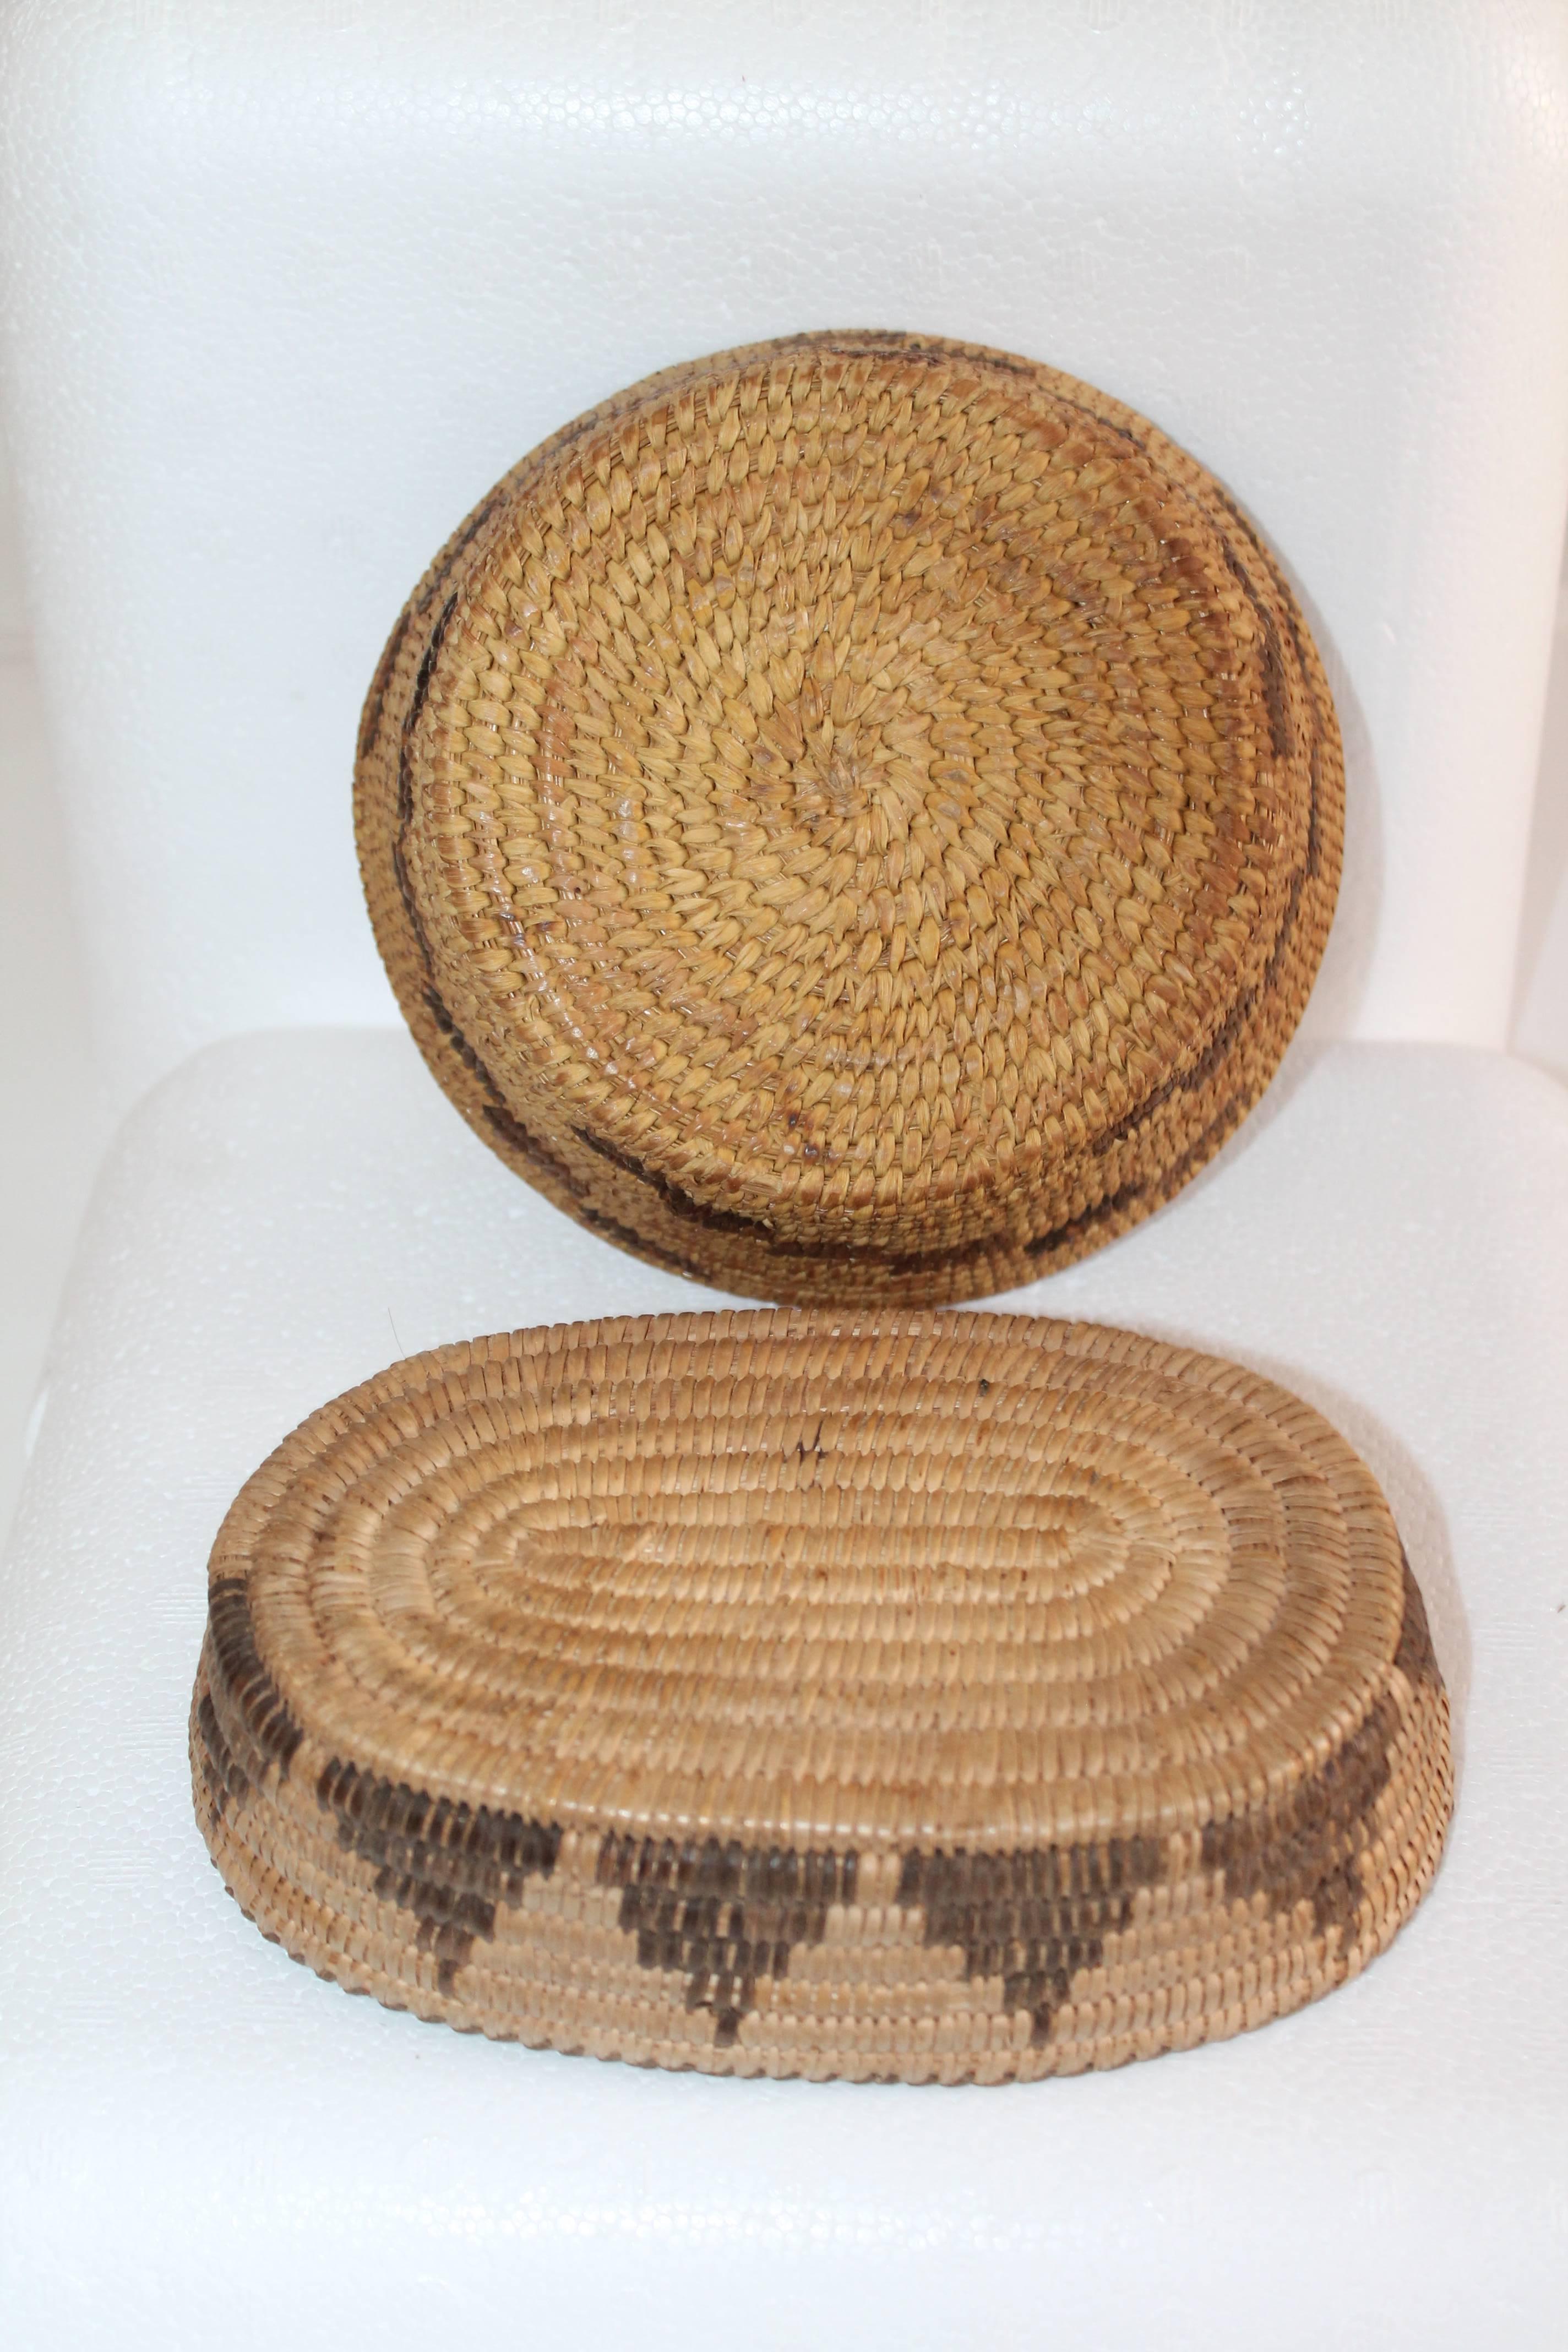 Native American Collection of Five Pima Indian Baskets